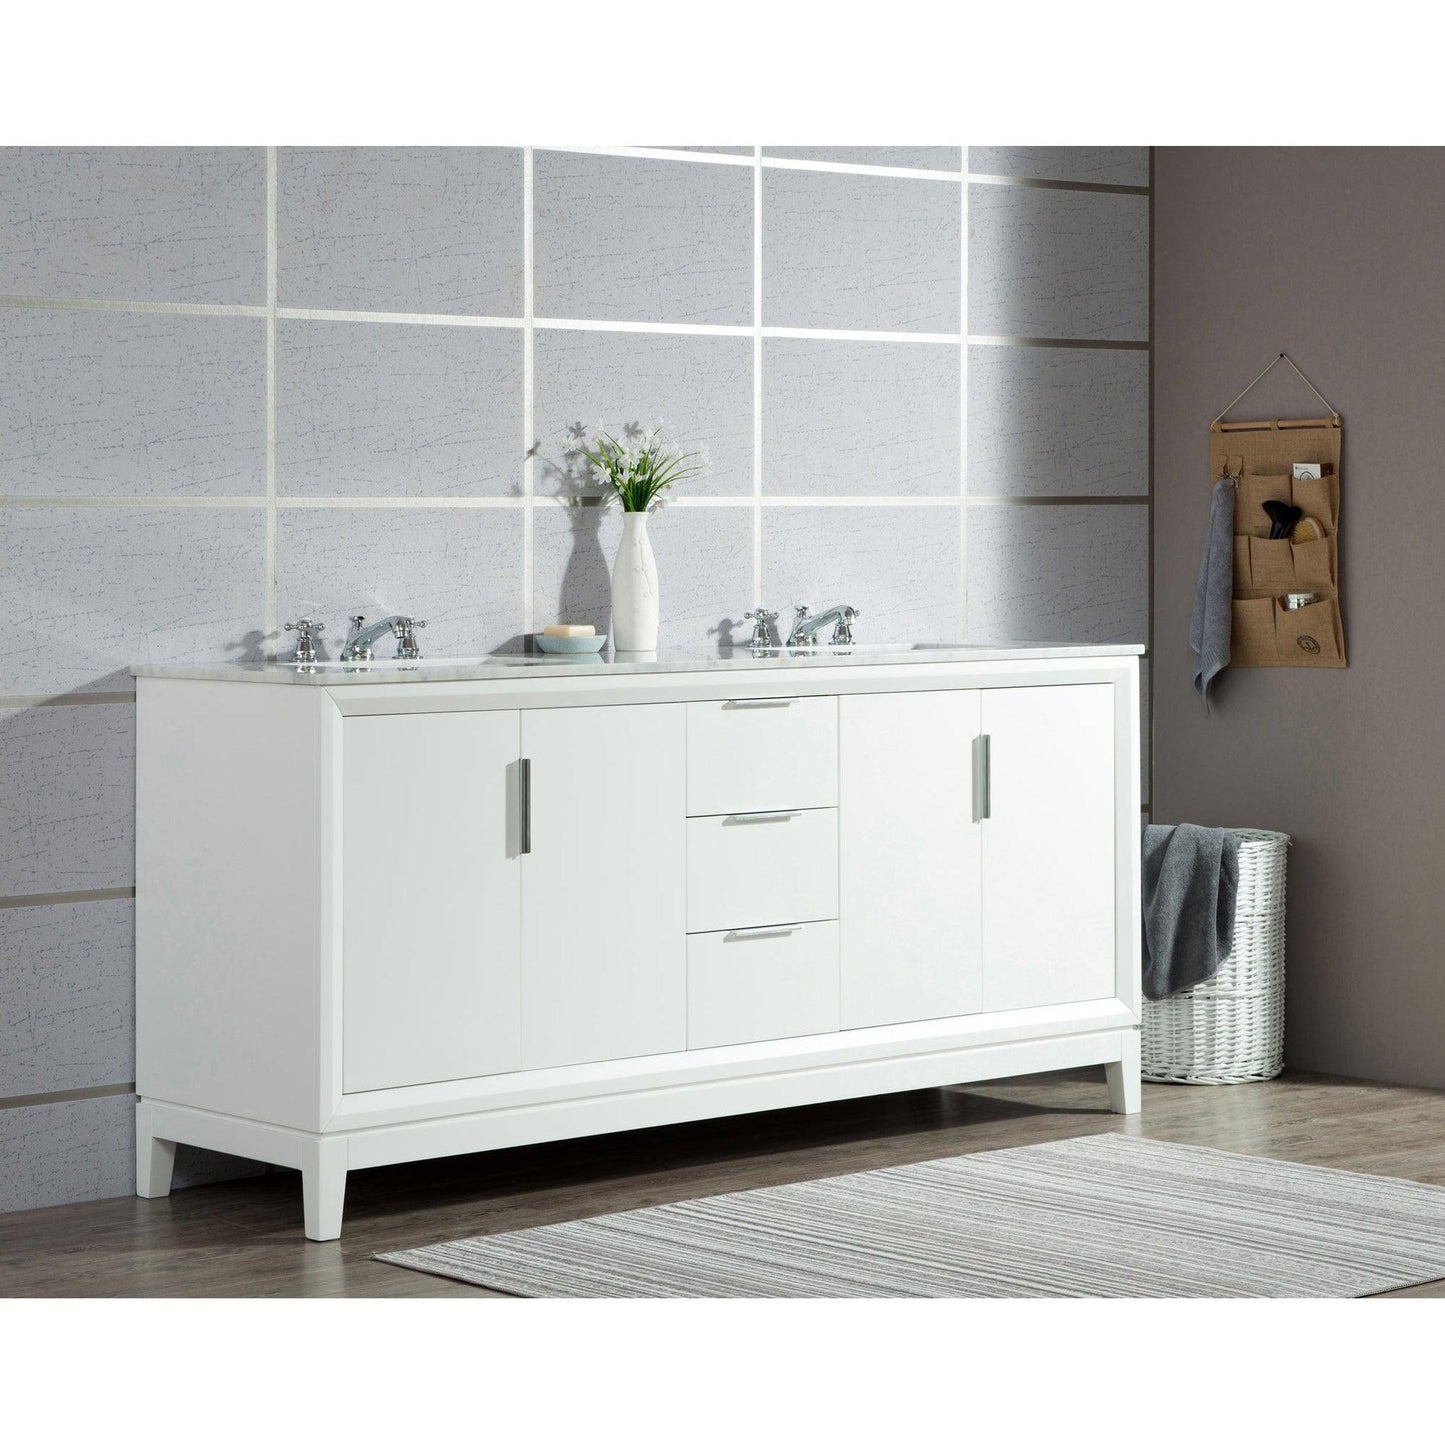 Water Creation Elizabeth 72" Double Sink Carrara White Marble Vanity In Pure White